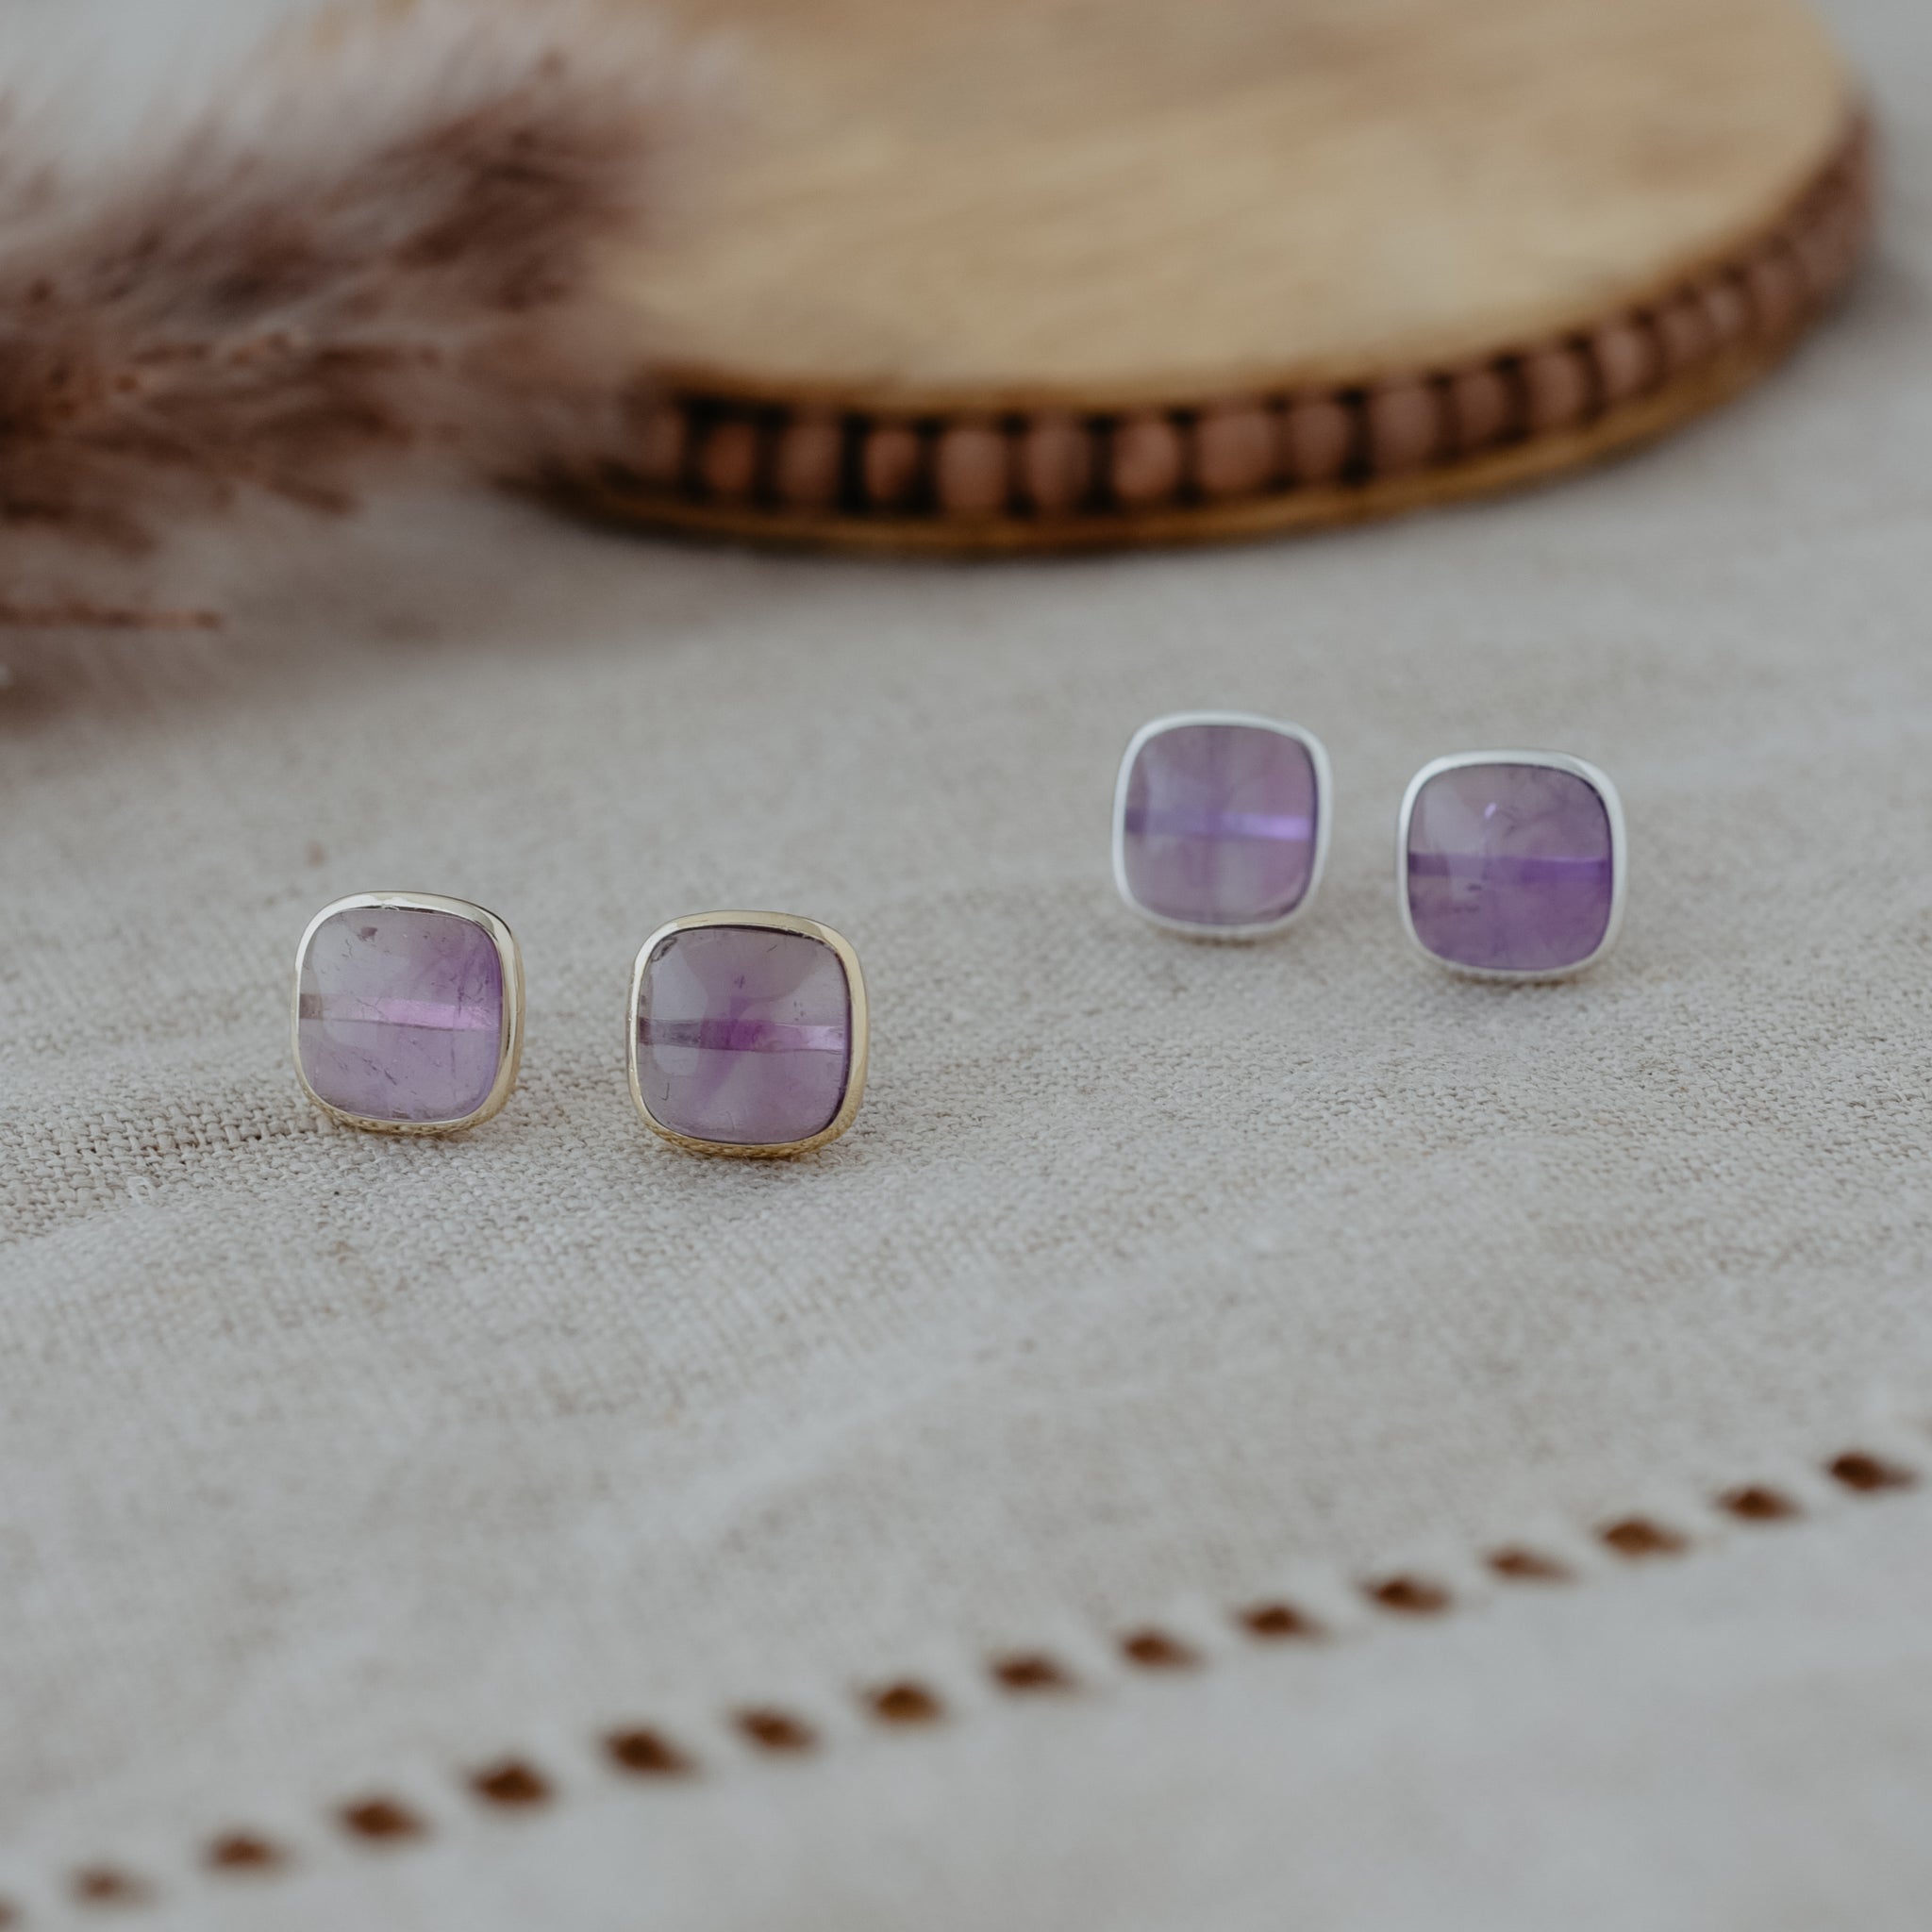 House of Frosted 14K White Gold Plated Amethyst Drop Earrings - QVC.com